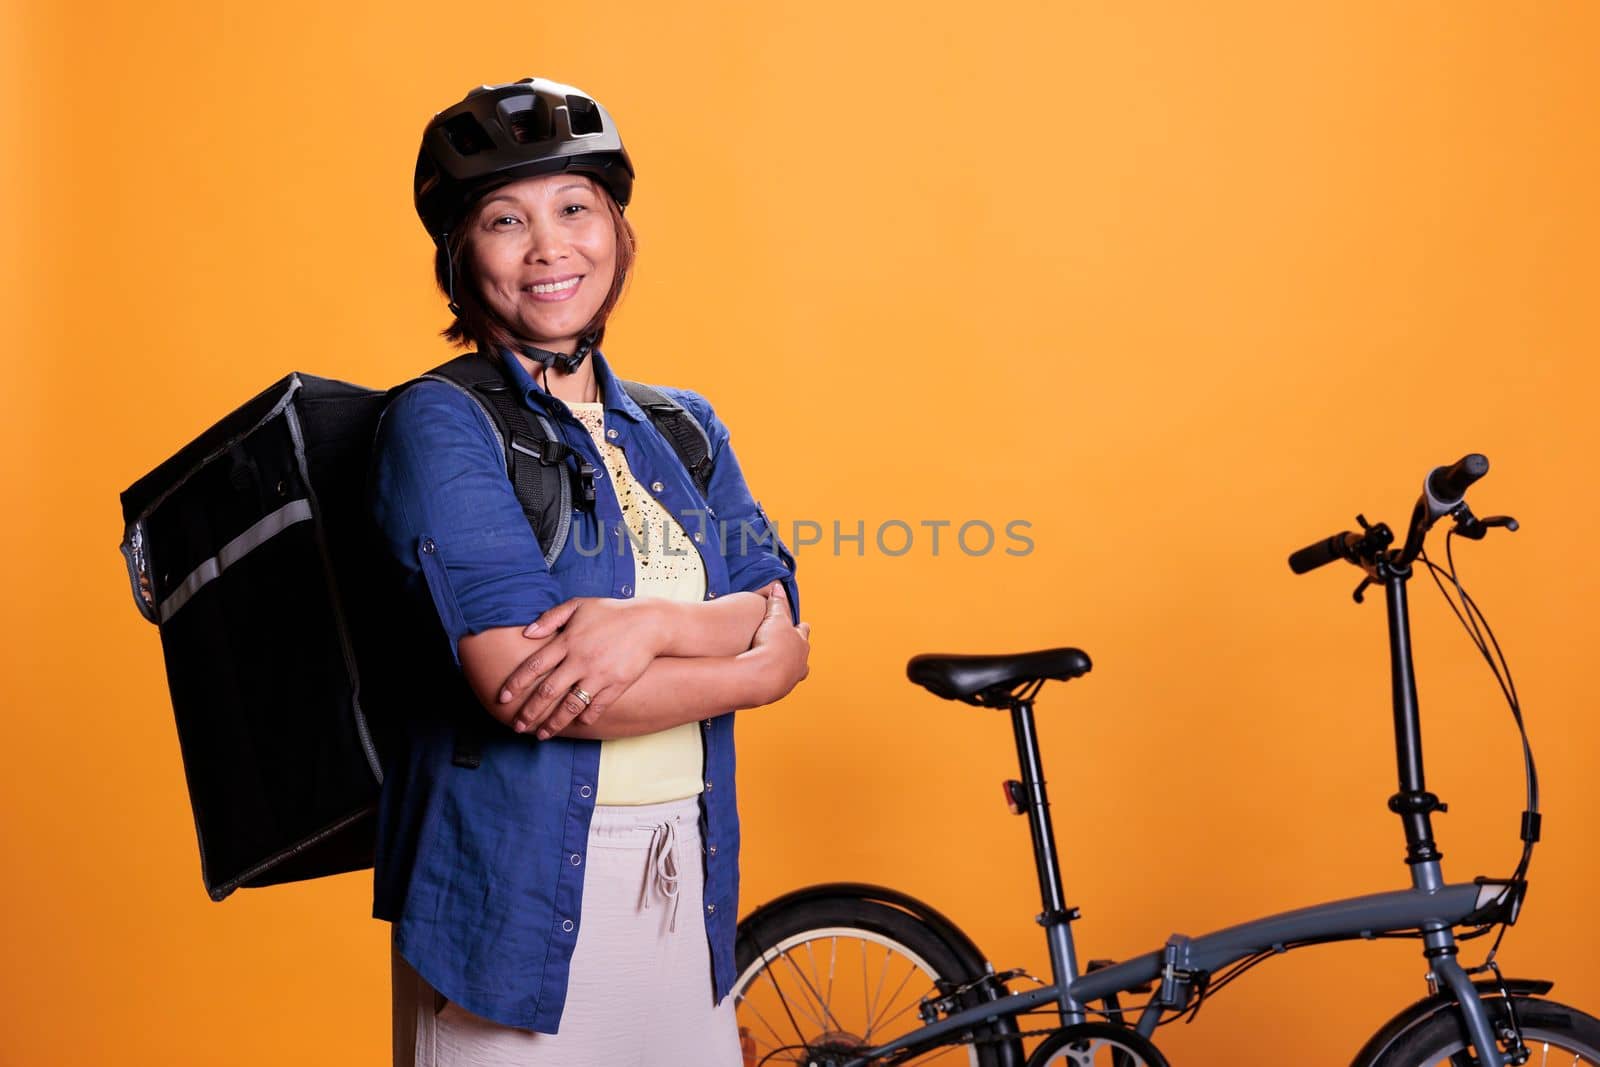 Asian deliver carrying food takeaway backpack standing beside bike in studio with yellow background. Restaurant courier delivering pizza for dinner. Food transportation service and takeaway concept